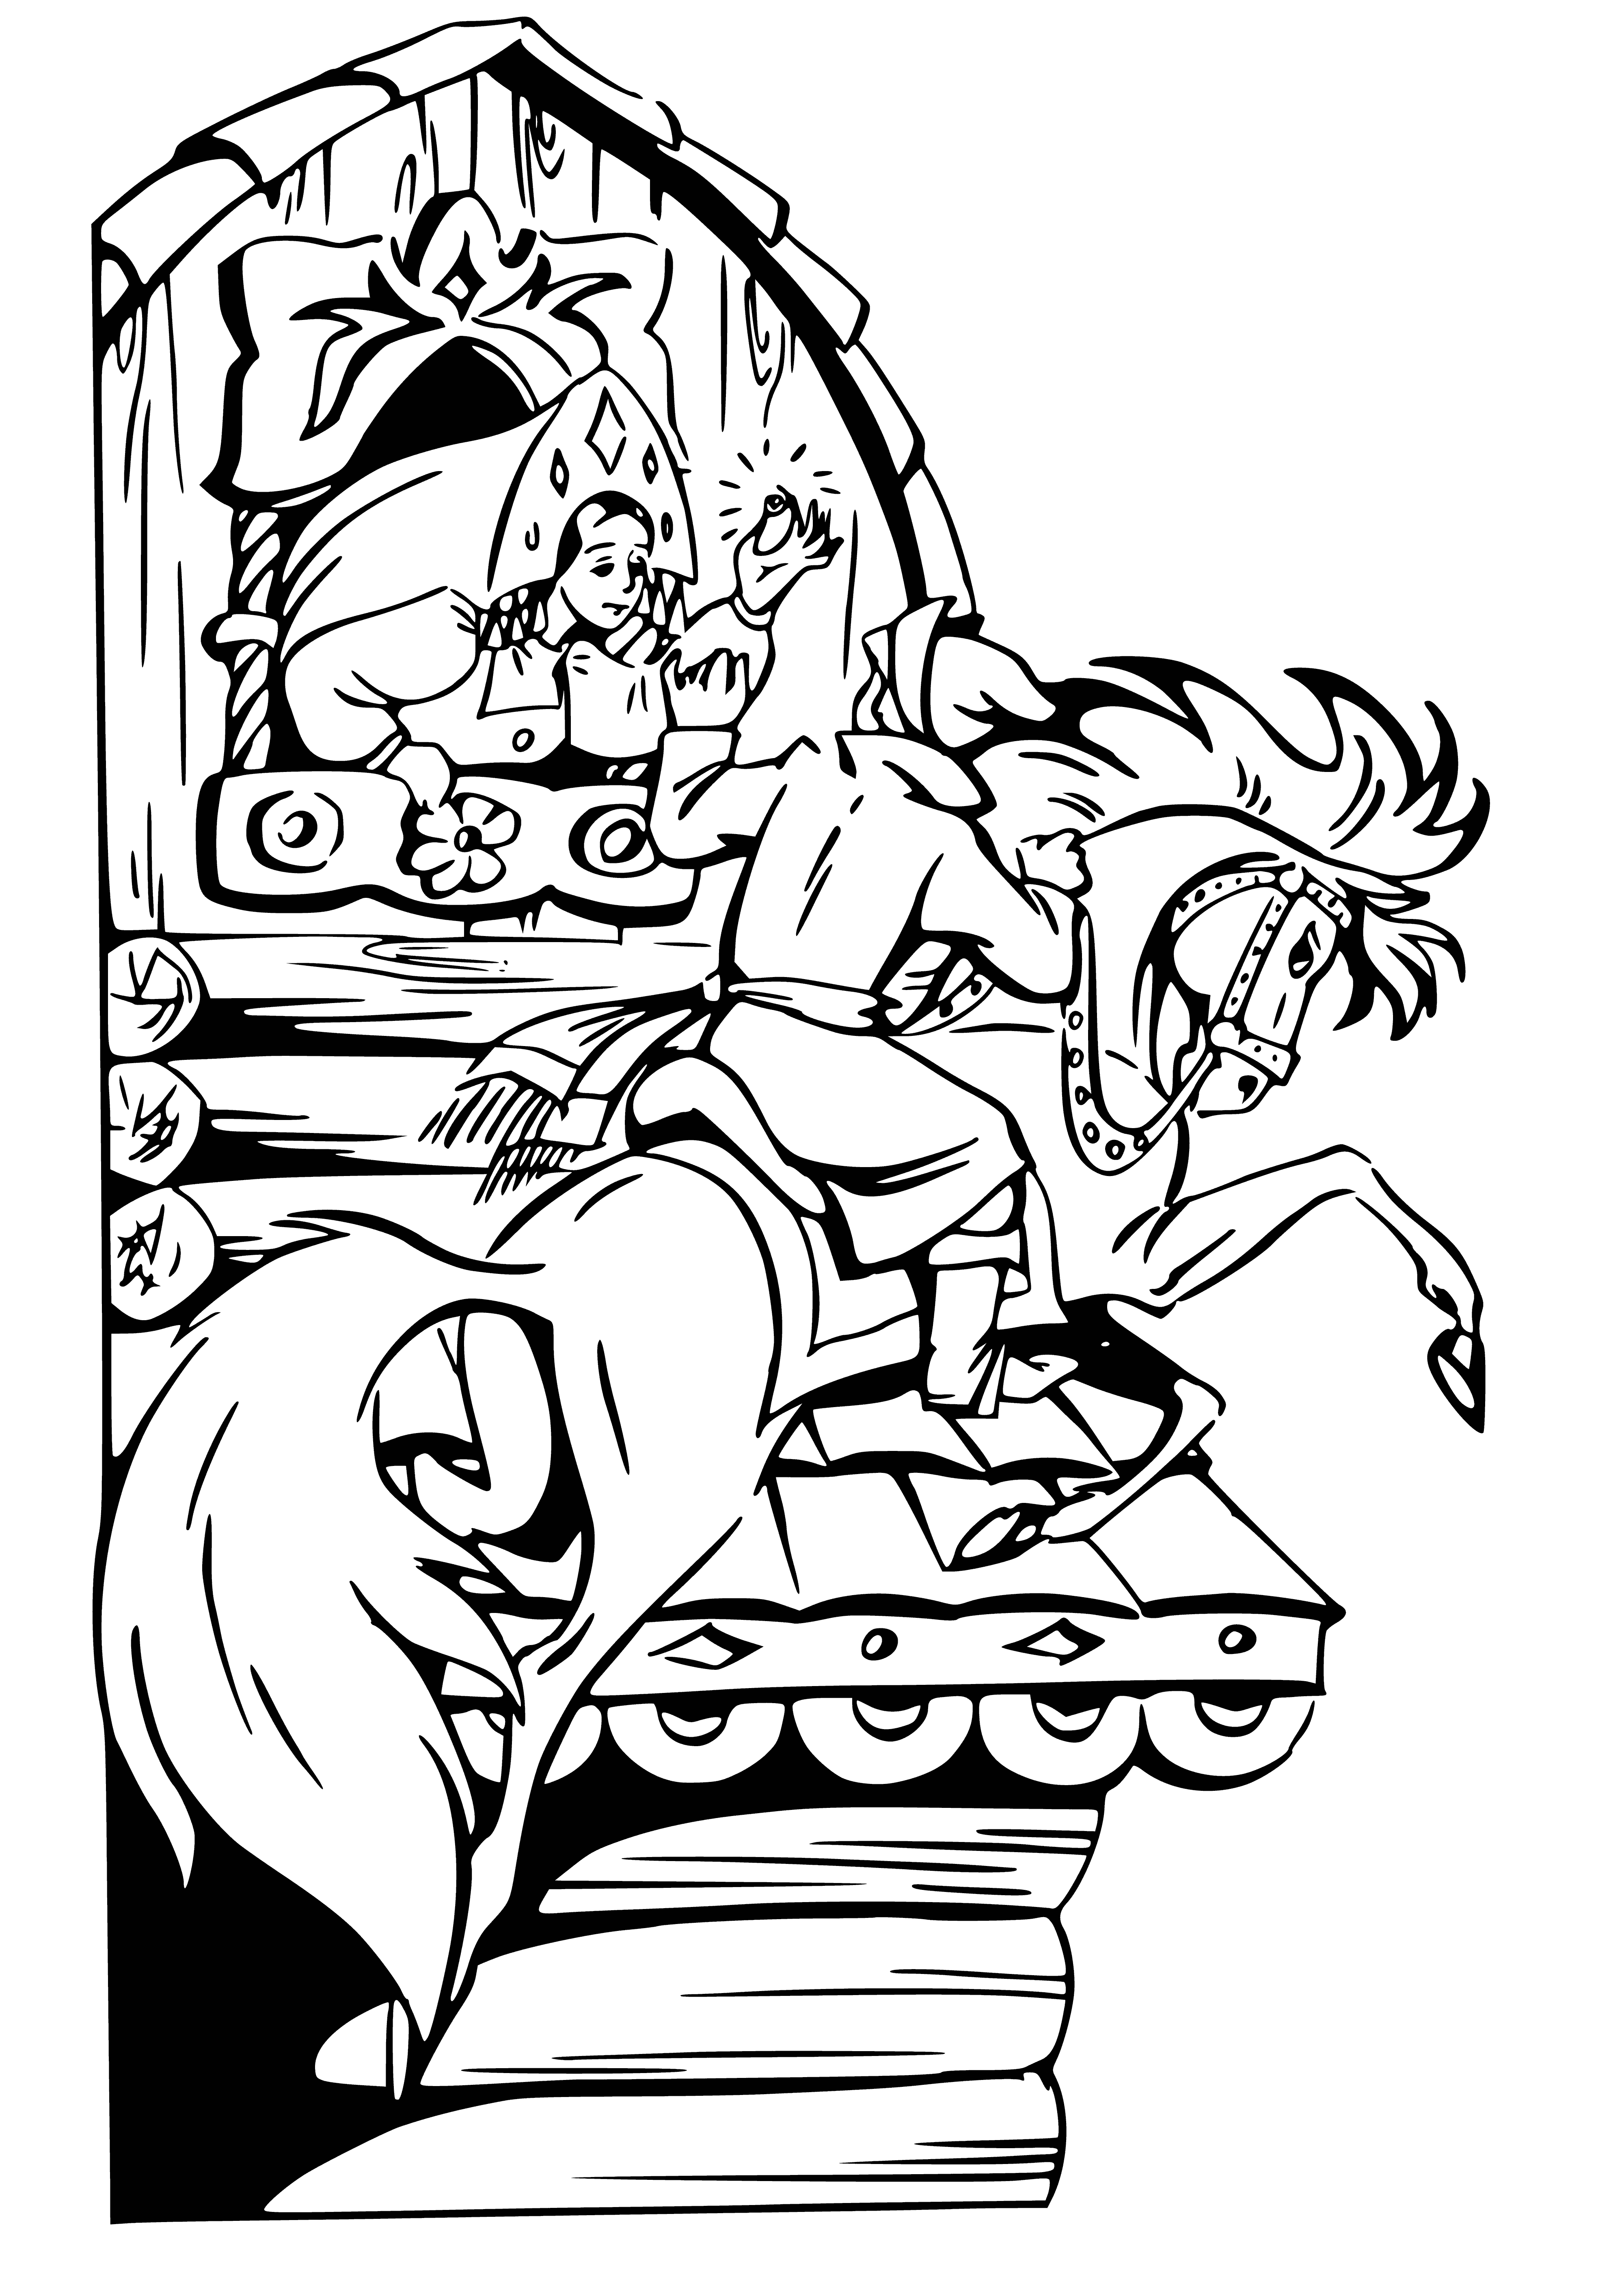 The princess in the tower coloring page